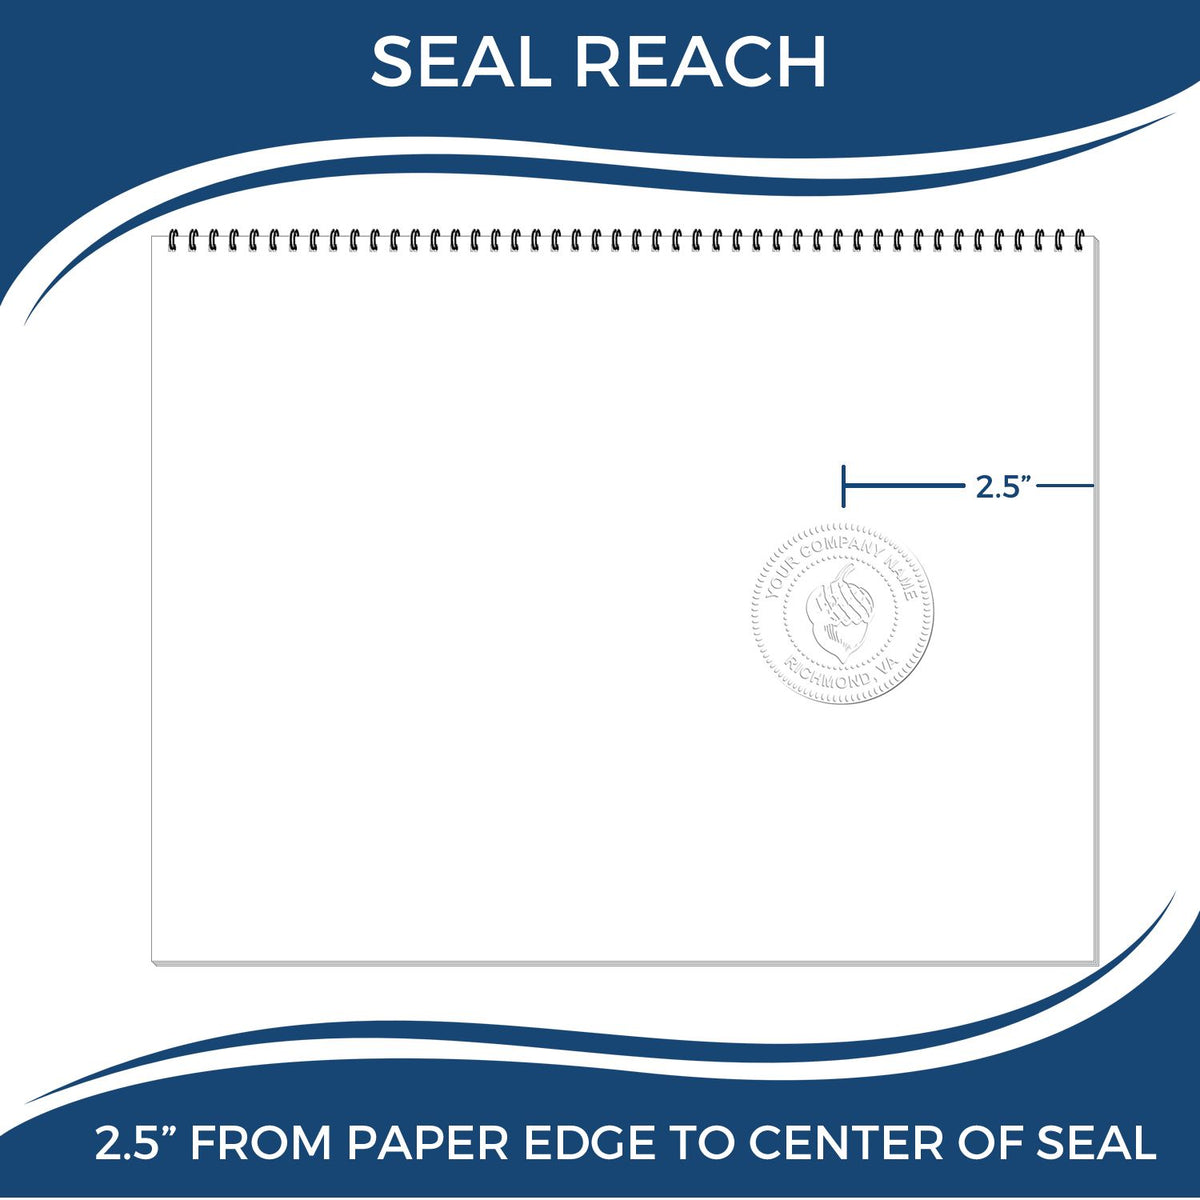 An infographic showing the seal reach which is represented by a ruler and a miniature seal image of the Heavy Duty Cast Iron Hawaii Geologist Seal Embosser